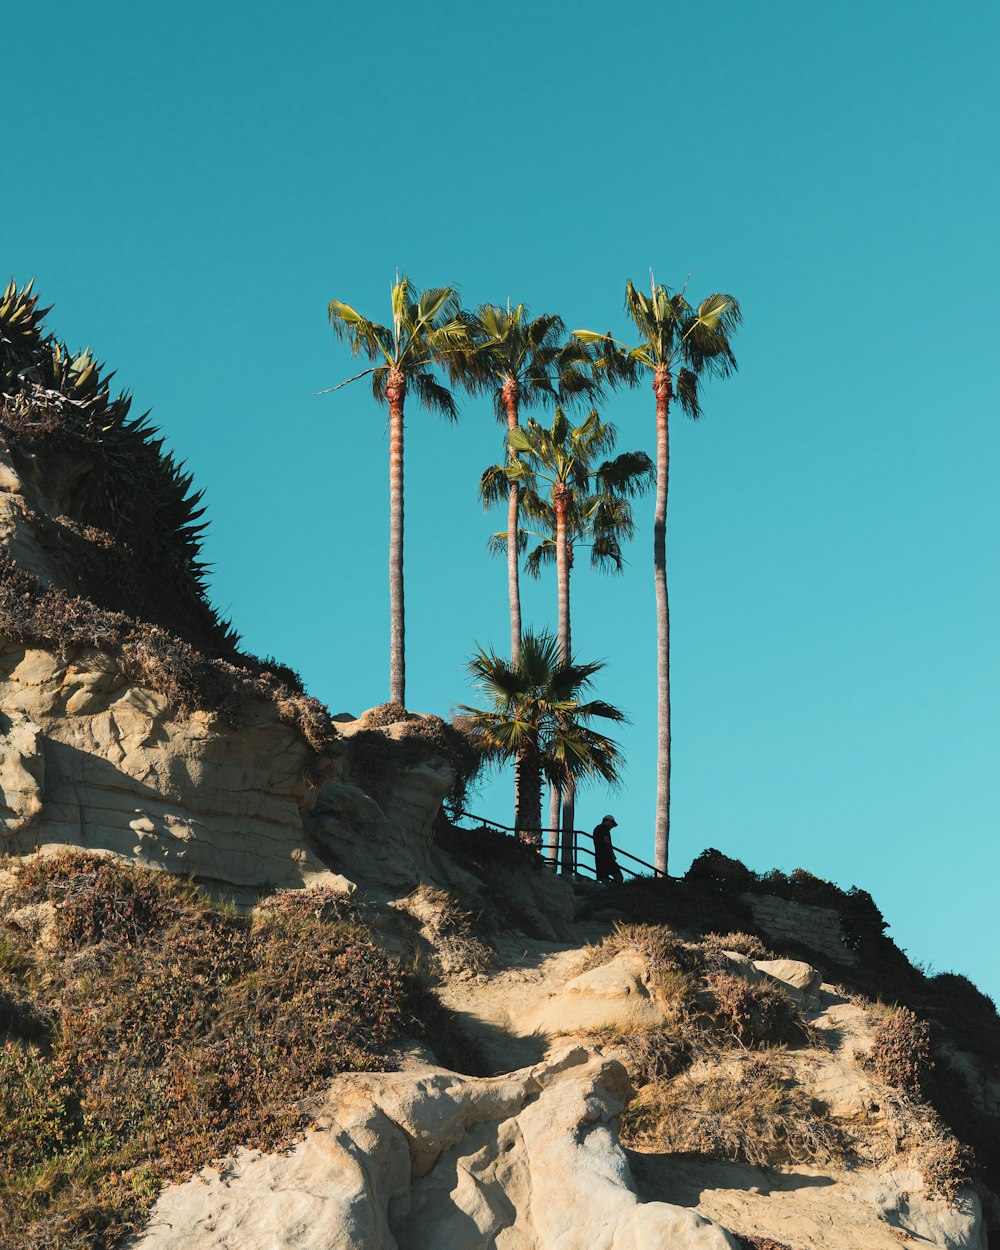 palm tree on brown rocky hill under blue sky during daytime